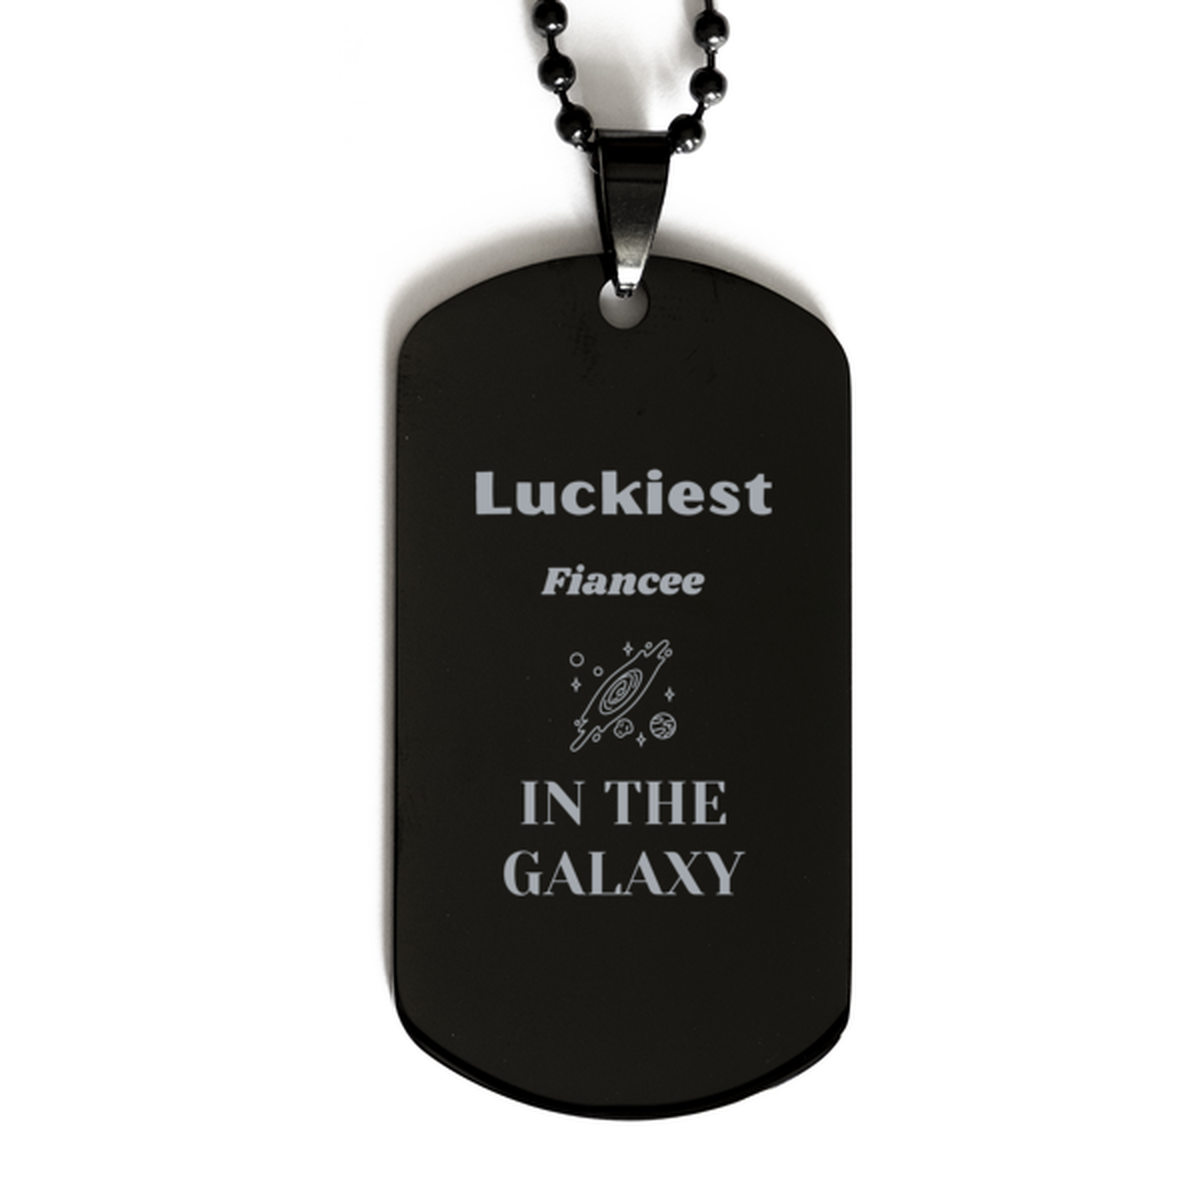 Luckiest Fiancee in the Galaxy, To My Fiancee Engraved Gifts, Christmas Fiancee Black Dog Tag Gifts, X-mas Birthday Unique Gifts For Fiancee Men Women